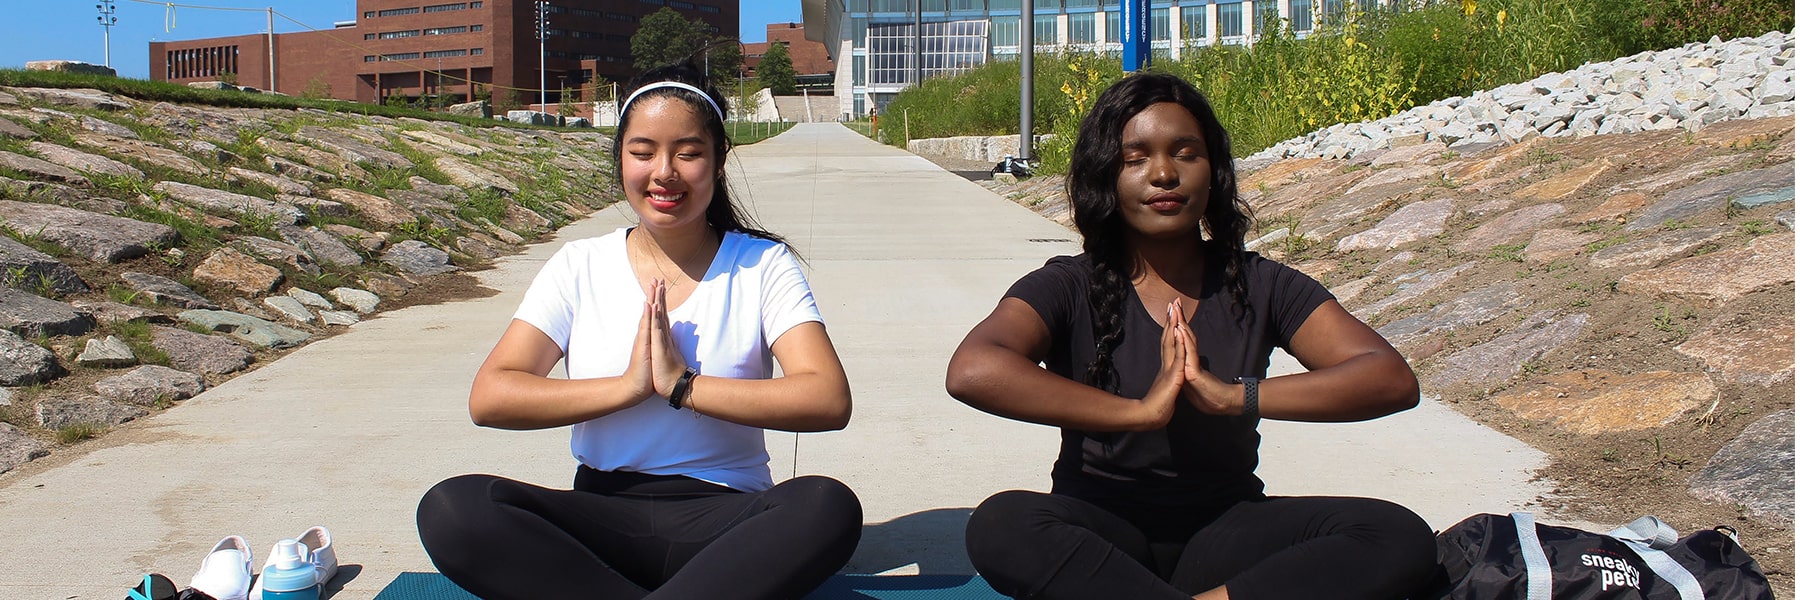 Two students sit crosslegged with hands together in a yoga pose in front of campus center.